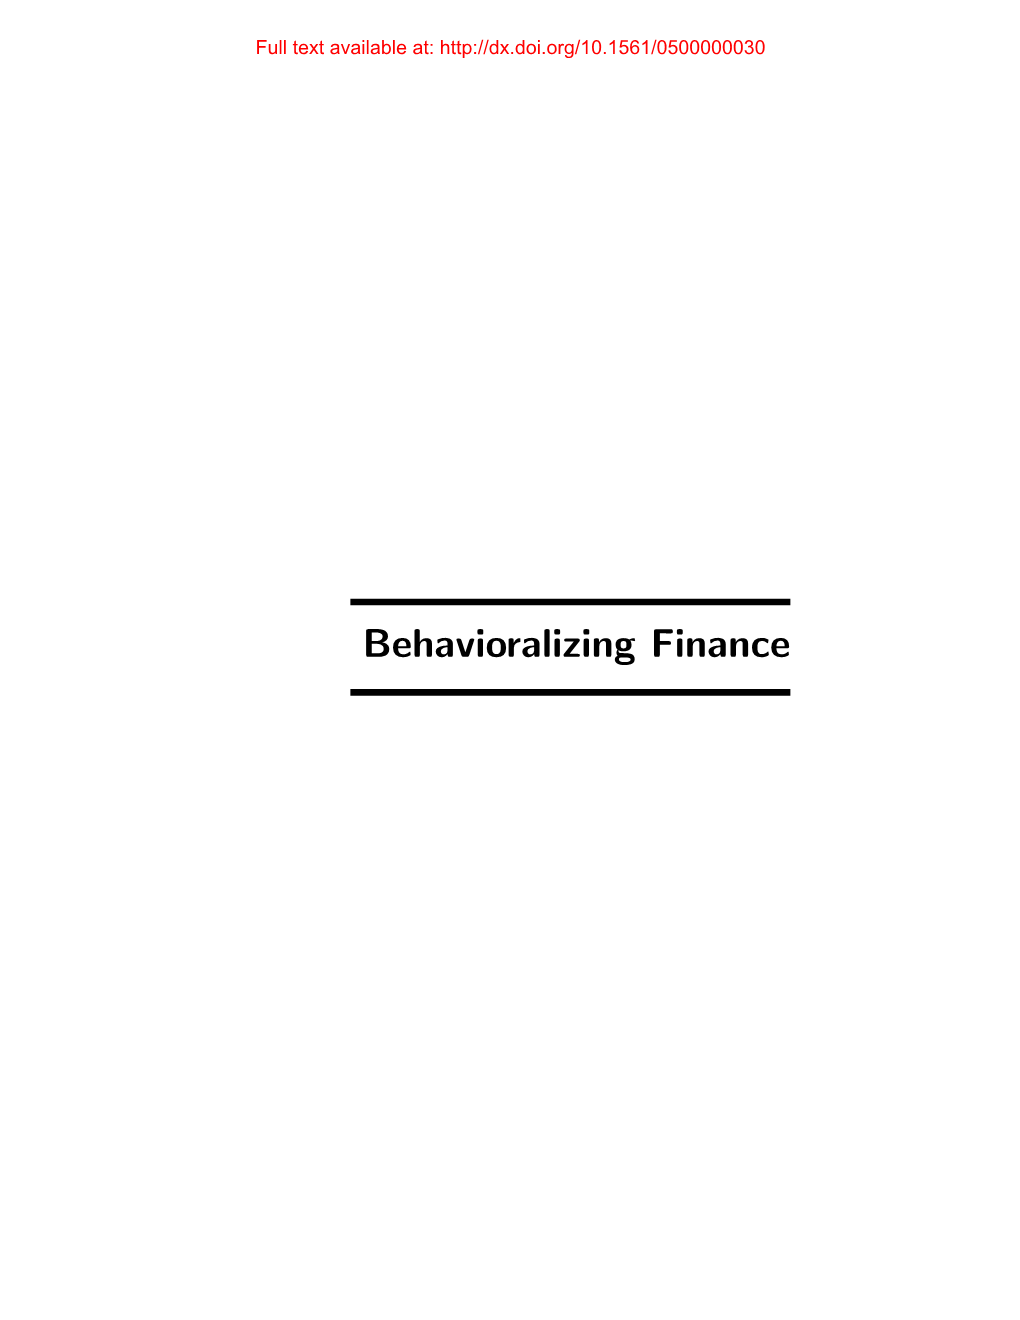 Behavioralizing Finance Full Text Available At